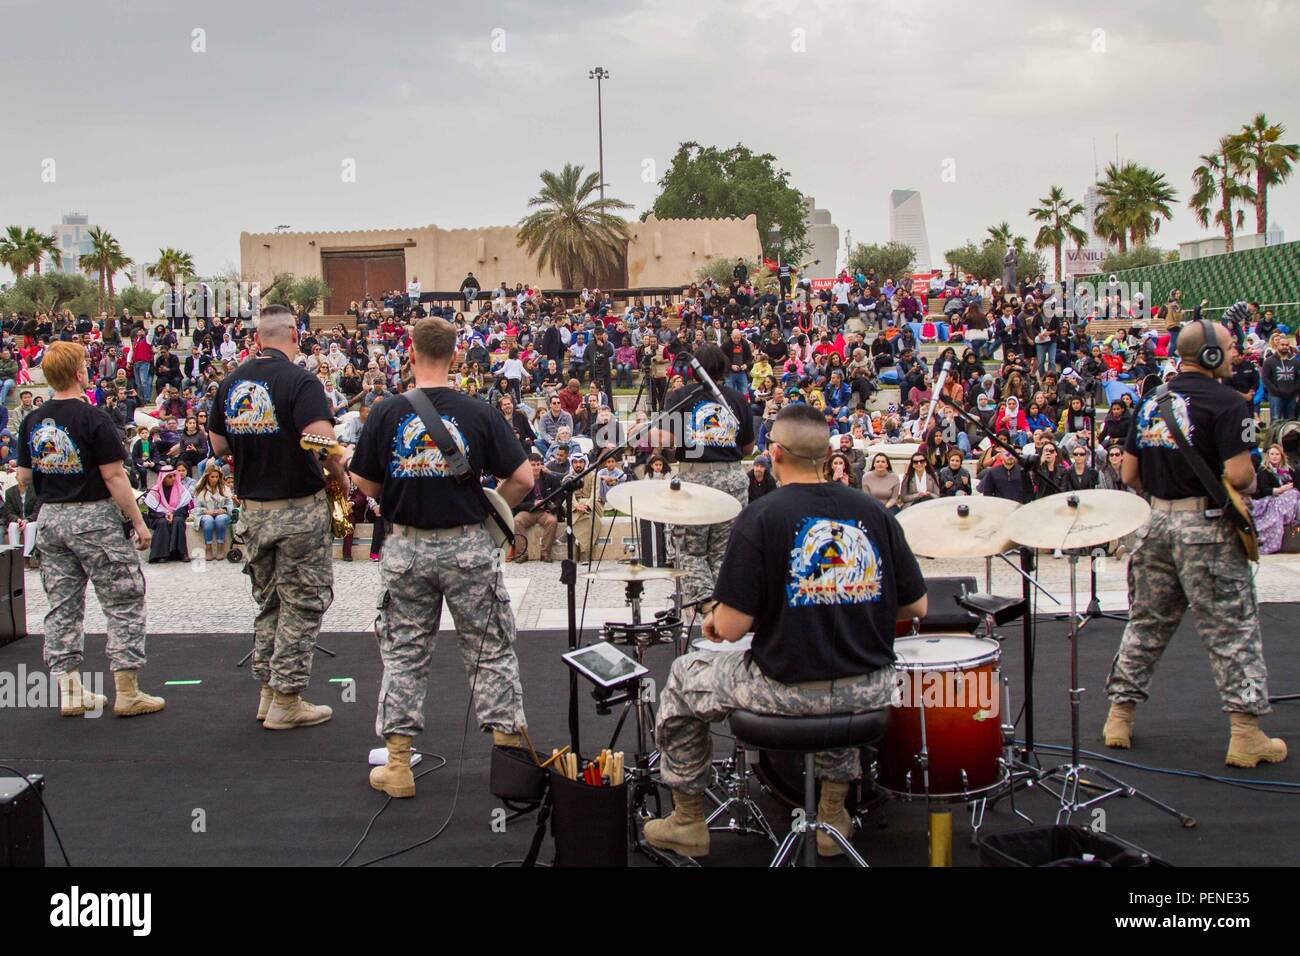 Members of Shockwave, the 1st Armored Division Rock Band, perform before a standing room only crowd at the United Through Music cultural event at Al-Shaheed Park, Kuwait City, Jan. 8. The event was part of the 25th anniversary celebration of Kuwait’s liberation during the Gulf War. (U.S. Army photo by Sgt. David N. Beckstrom, 19th Public Affairs Detachment, U.S. Army Central) Stock Photo